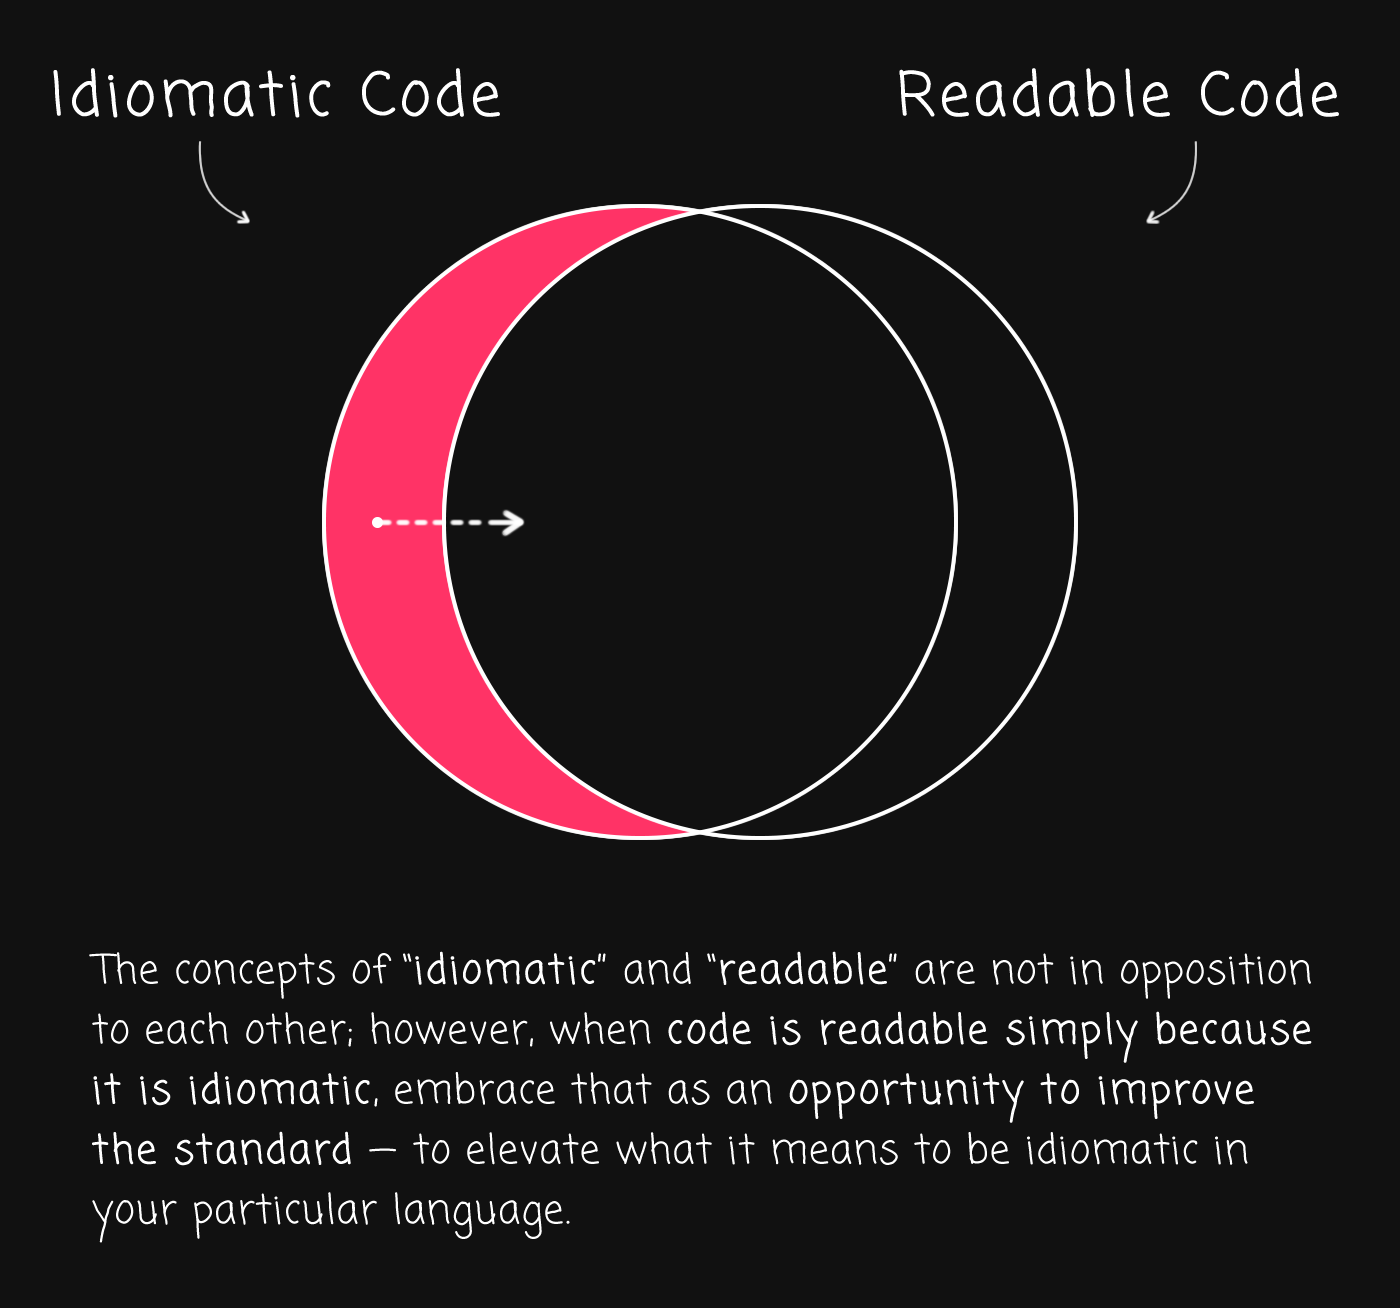 Favor readable code over idiomatic code.